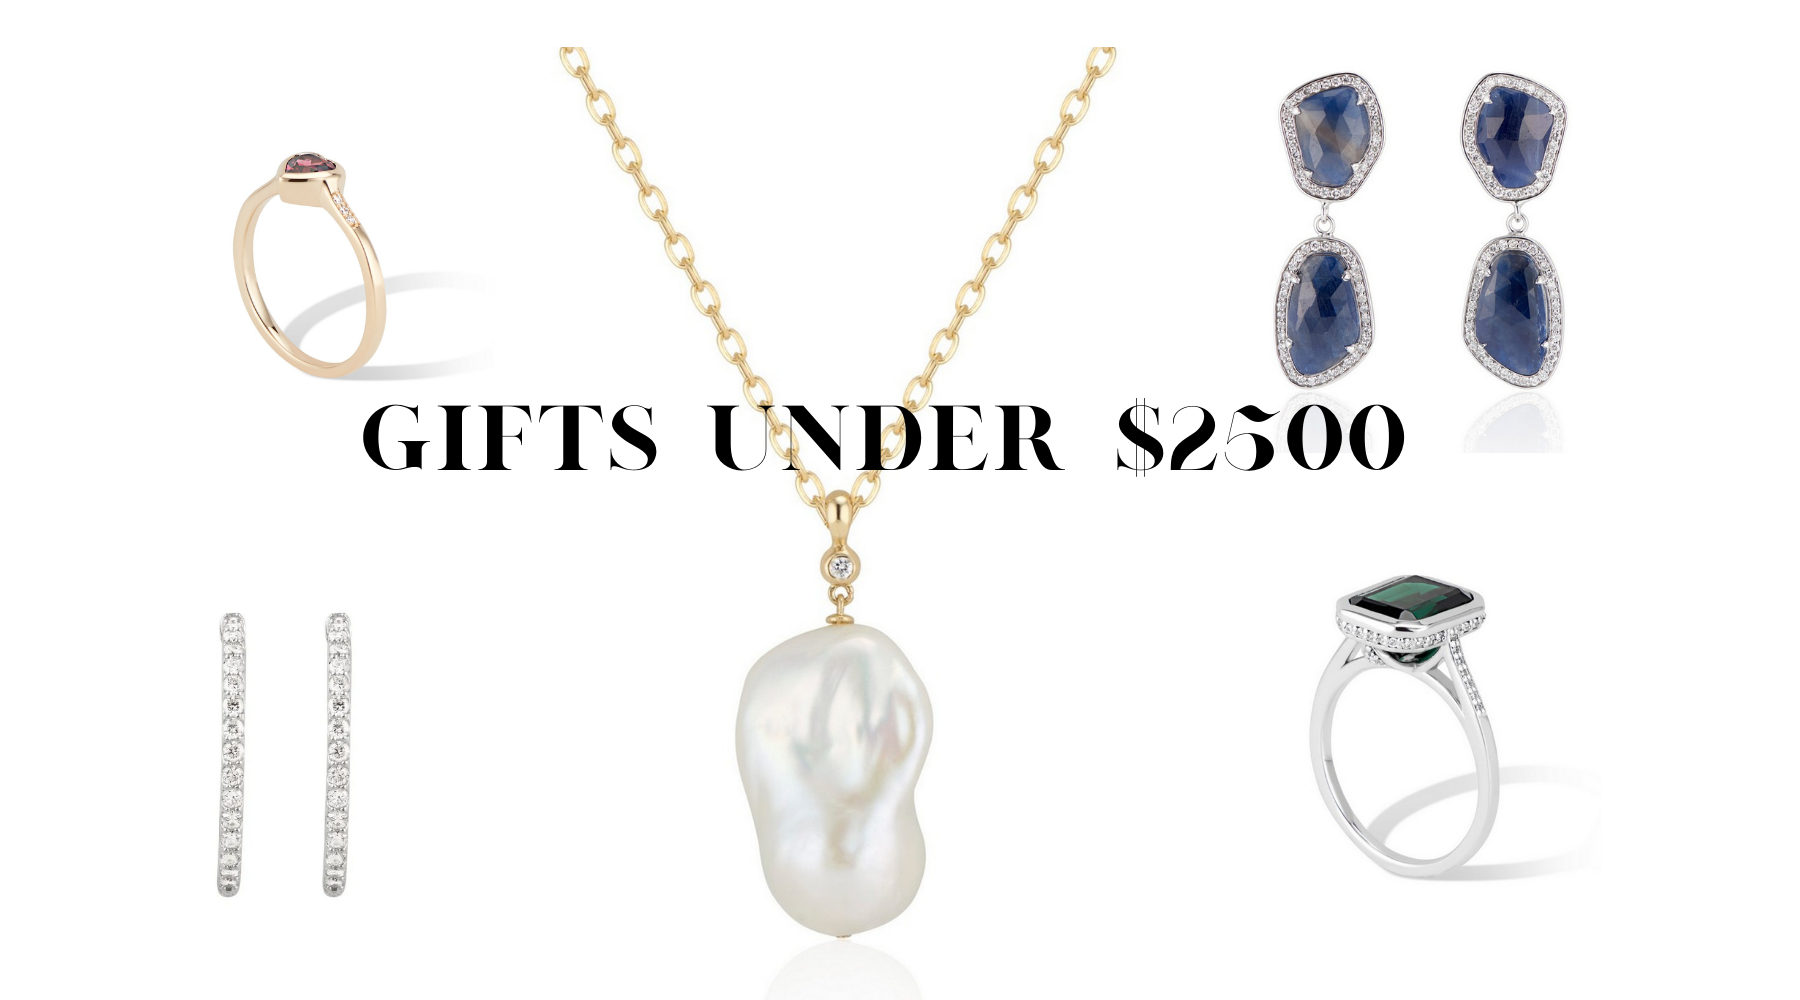 Shop Fine Jewelry Gifts - Gold Diamond Gemstones between $800 and $2500